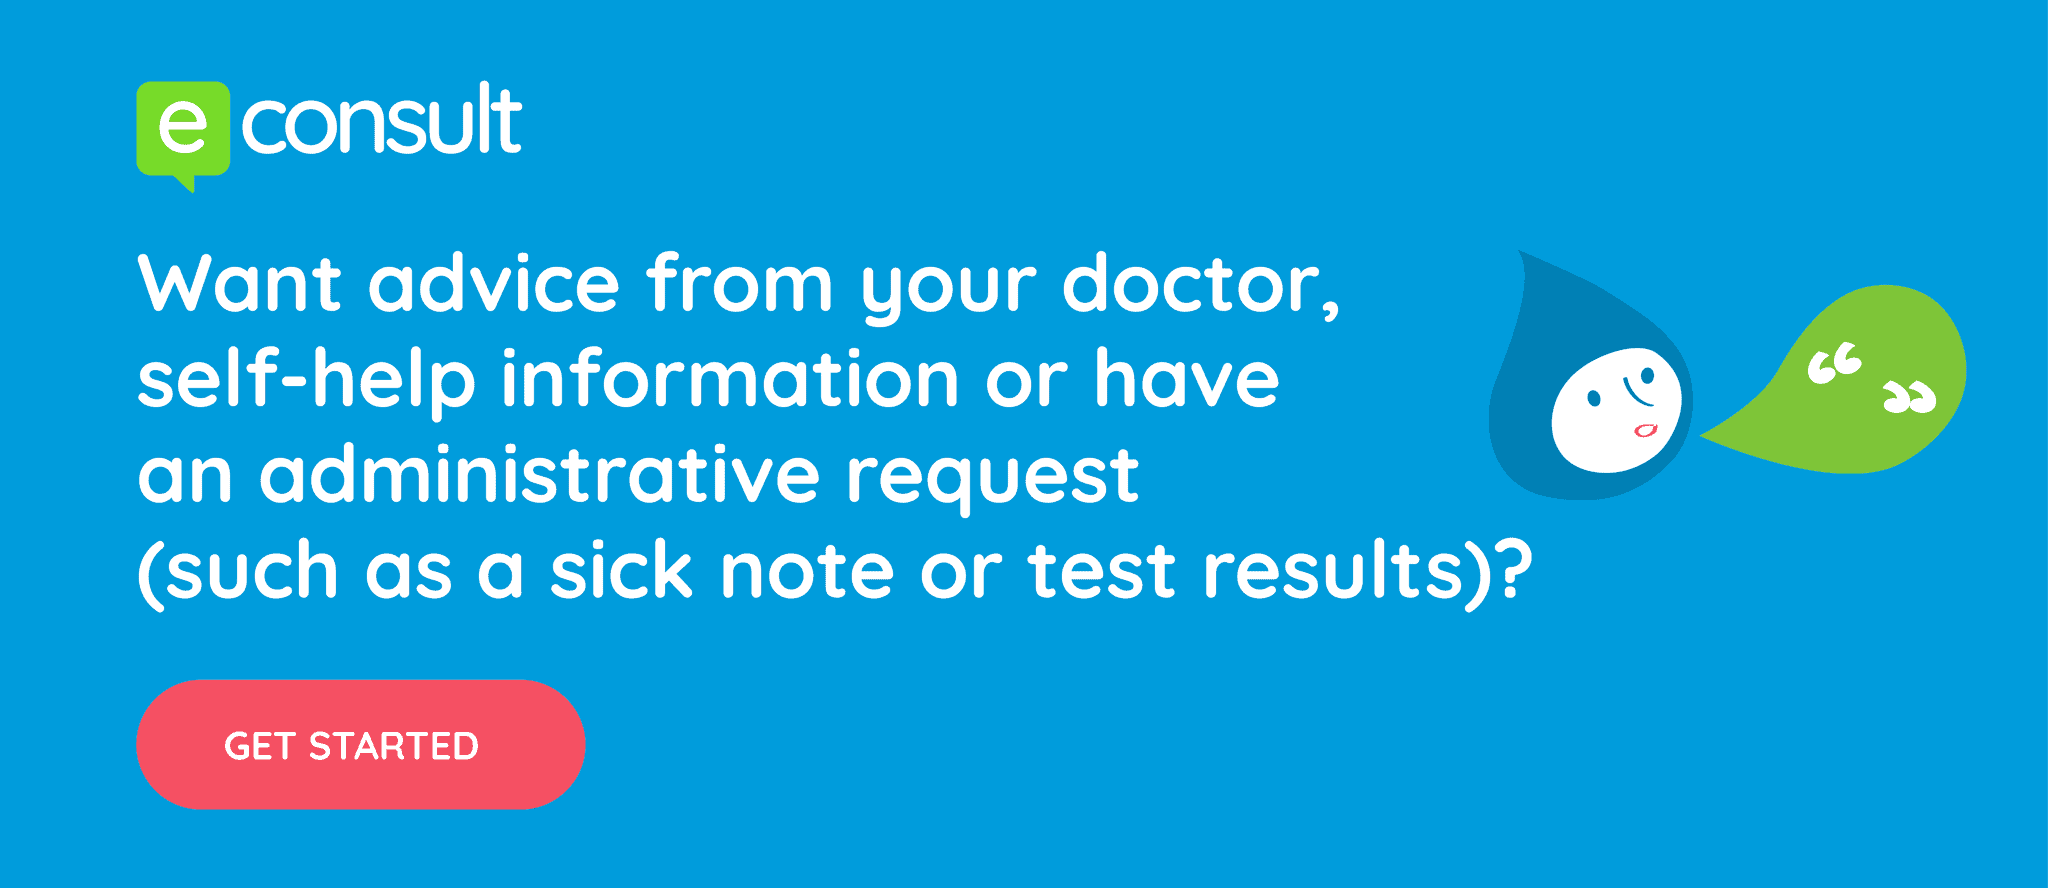 Want advice from your doctor, self-help information or have and administration request? Get started online.